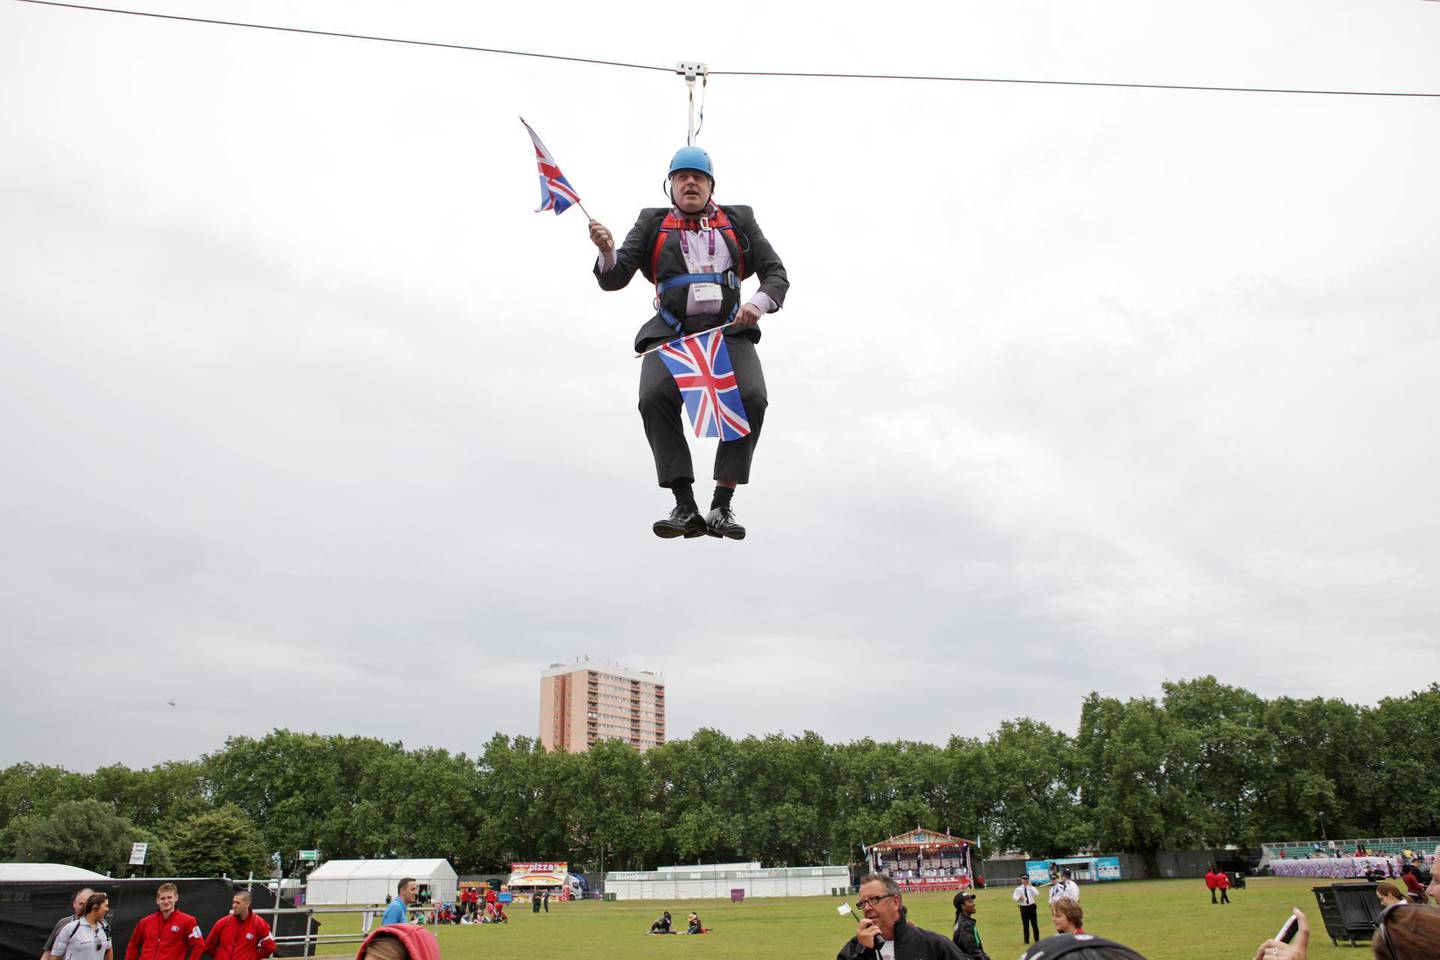 ***STOCK FILE IMAGE***LONDON, UNITED KINGDOM - AUGUST 01: Mayor of London Boris Johnson got stuck on a zip-line during BT London Live in Victoria Park on August 01, 2012 in London, England.

London Mayor Boris Johnson has proved he is ready to put his body on the line for a successful 2012 Olympics - but he might have gone too far in his latest stunt after getting stuck on a zip-line in Victoria Park. Mr Johnson was a guest at a BT London Live event at the east London park, where visitors can watch the Games action on a big screen or try their hand at a range of Olympic sports. But the mayor quickly became a major talking point on Twitter after pictures taken by people at the park surfaced of him dangling awkwardly from the wire, while brandishing a couple of Union flags. Several pictures showed Mr Johnson hanging from a harness wearing a blue helmet while waving the flags, although it is uncertain whether he was intending to stop where he did - or if it was a true zip-line malfunction. Earlier this week a poll of Conservative voters suggested the mayor was their top choice to succeed David Cameron as prime minister. He has so far enjoyed a high-profile Games, kicked off by addressing 60,000 people in Hyde Park on the day of the opening ceremony by taunting Republican presidential nominee Mitt Romney over his comments apparently doubting London's readiness to host.

PHOTOGRAPH BY Barcroft Media

UK Office, London.
T +44 845 370 2233
W www.barcroftmedia.com

USA Office, New York City.
T +1 212 796 2458
W www.barcroftusa.com

Indian Office, Delhi.
T +91 11 4053 2429
W www.barcroftindia.comPHOTOGRAPH BY  / Barcroft Media 

London-T:+44 207 033 1031 E:hello@barcroftmedia.com -
New York-T:+1 212 796 2458 E:hello@barcroftusa.com -
New Delhi-T:+91 11 4053 2429 E:hello@barcroftindia.com www.barcroftmedia.com (Photo credit should read Barcroft Media / Barcroft Media via Getty Images)